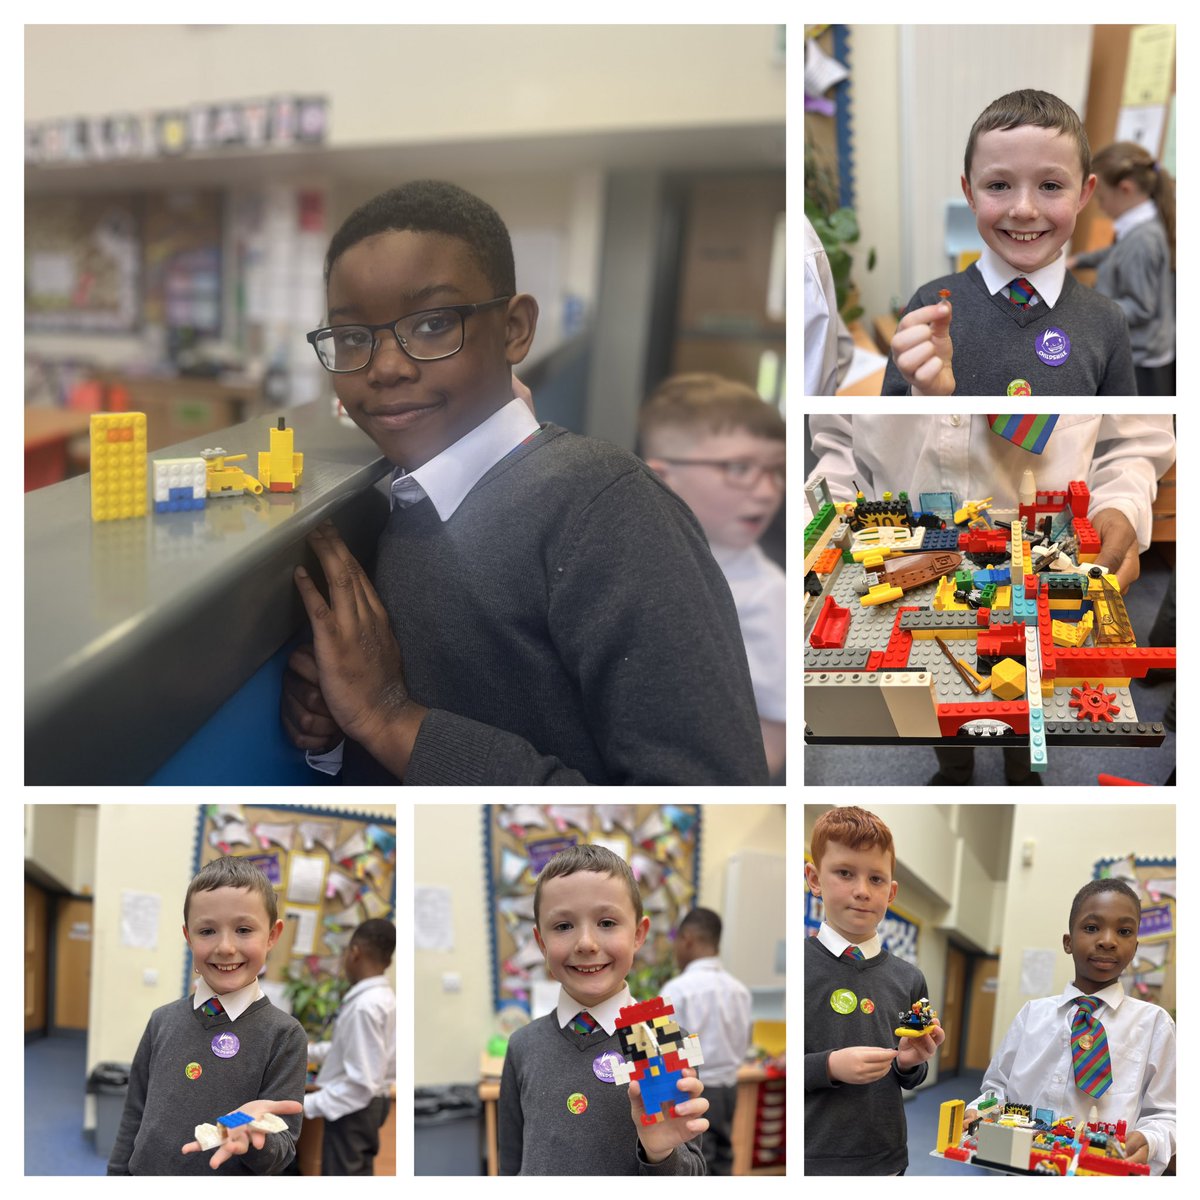 Lego club still in full swing and the creativity continues - so joyful to see our P4s just playing together unplugged with Lego for a hour! Thanks @sasbhighschool for sending your 3rd year helpers, they are so kind and patient!